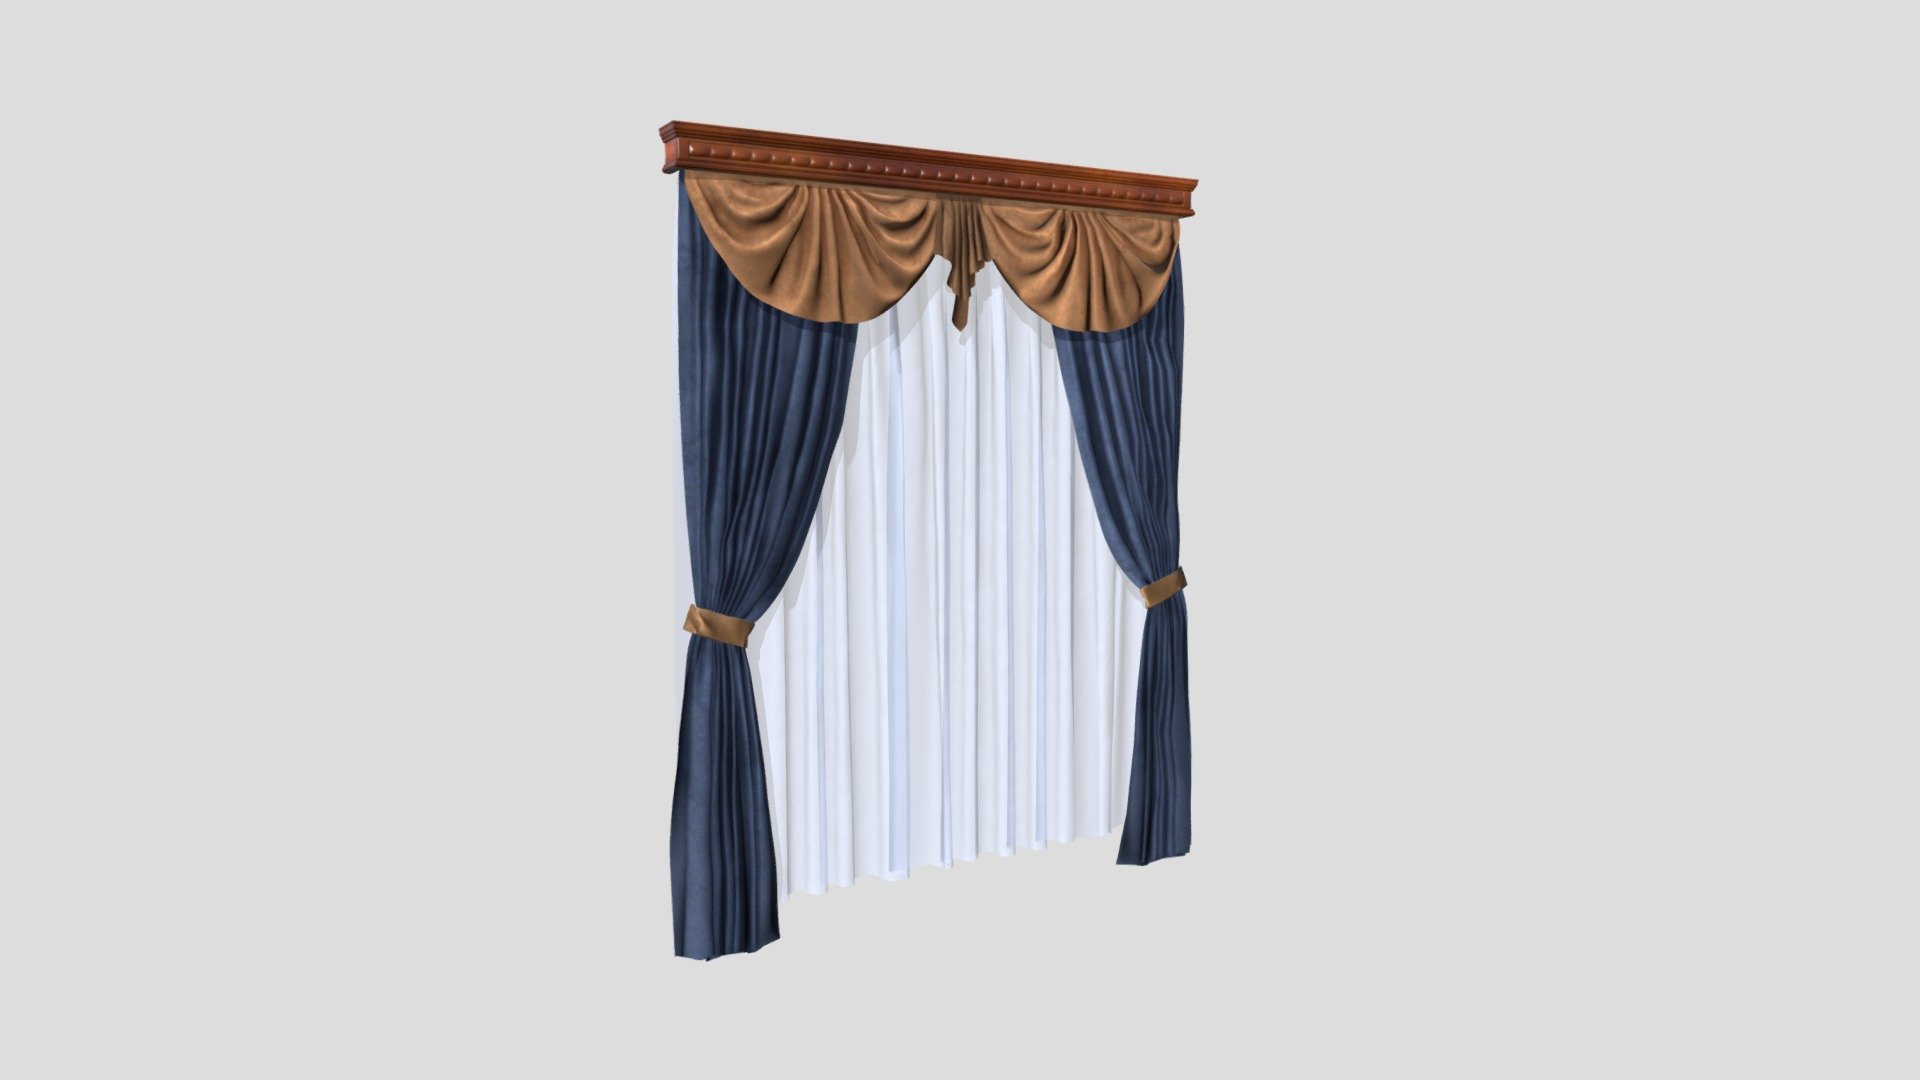 A set of low poly curtains for decorating window openings, door and interior with a width of 60+10 inches on baguette cornices:




low poly cornice,

low poly gardin,

low poly curtain.

The set includes 3 texture packs:





PBR MetalRought pack: BaseColor, Normal  (DirectX), Height, Metallic, Roughness and Alpha Mask (all 2048x2048).




UnrealEngine 4 pack: Diffuse (Albedo) - _D, Normal (DirectX) - _N, combined Occlusion+Roughness+Metallic - _RMA and  Alpha Mask - _A (all 2048x2048).




Unity 4 (Standard Metallic) pack: combined Albedo+Transparency+Alpha channel (for Alpha Mask) - _AT, Normal (OpenGL) - _N, combined Metallic and Smoothness - _MS (all 2048x2048).



The pack can be used for game development and VR-projects in virtual reality engines.

Support - №607 Curtain  3D low poly model for VR-projects - 3D model by serj_e 3d model